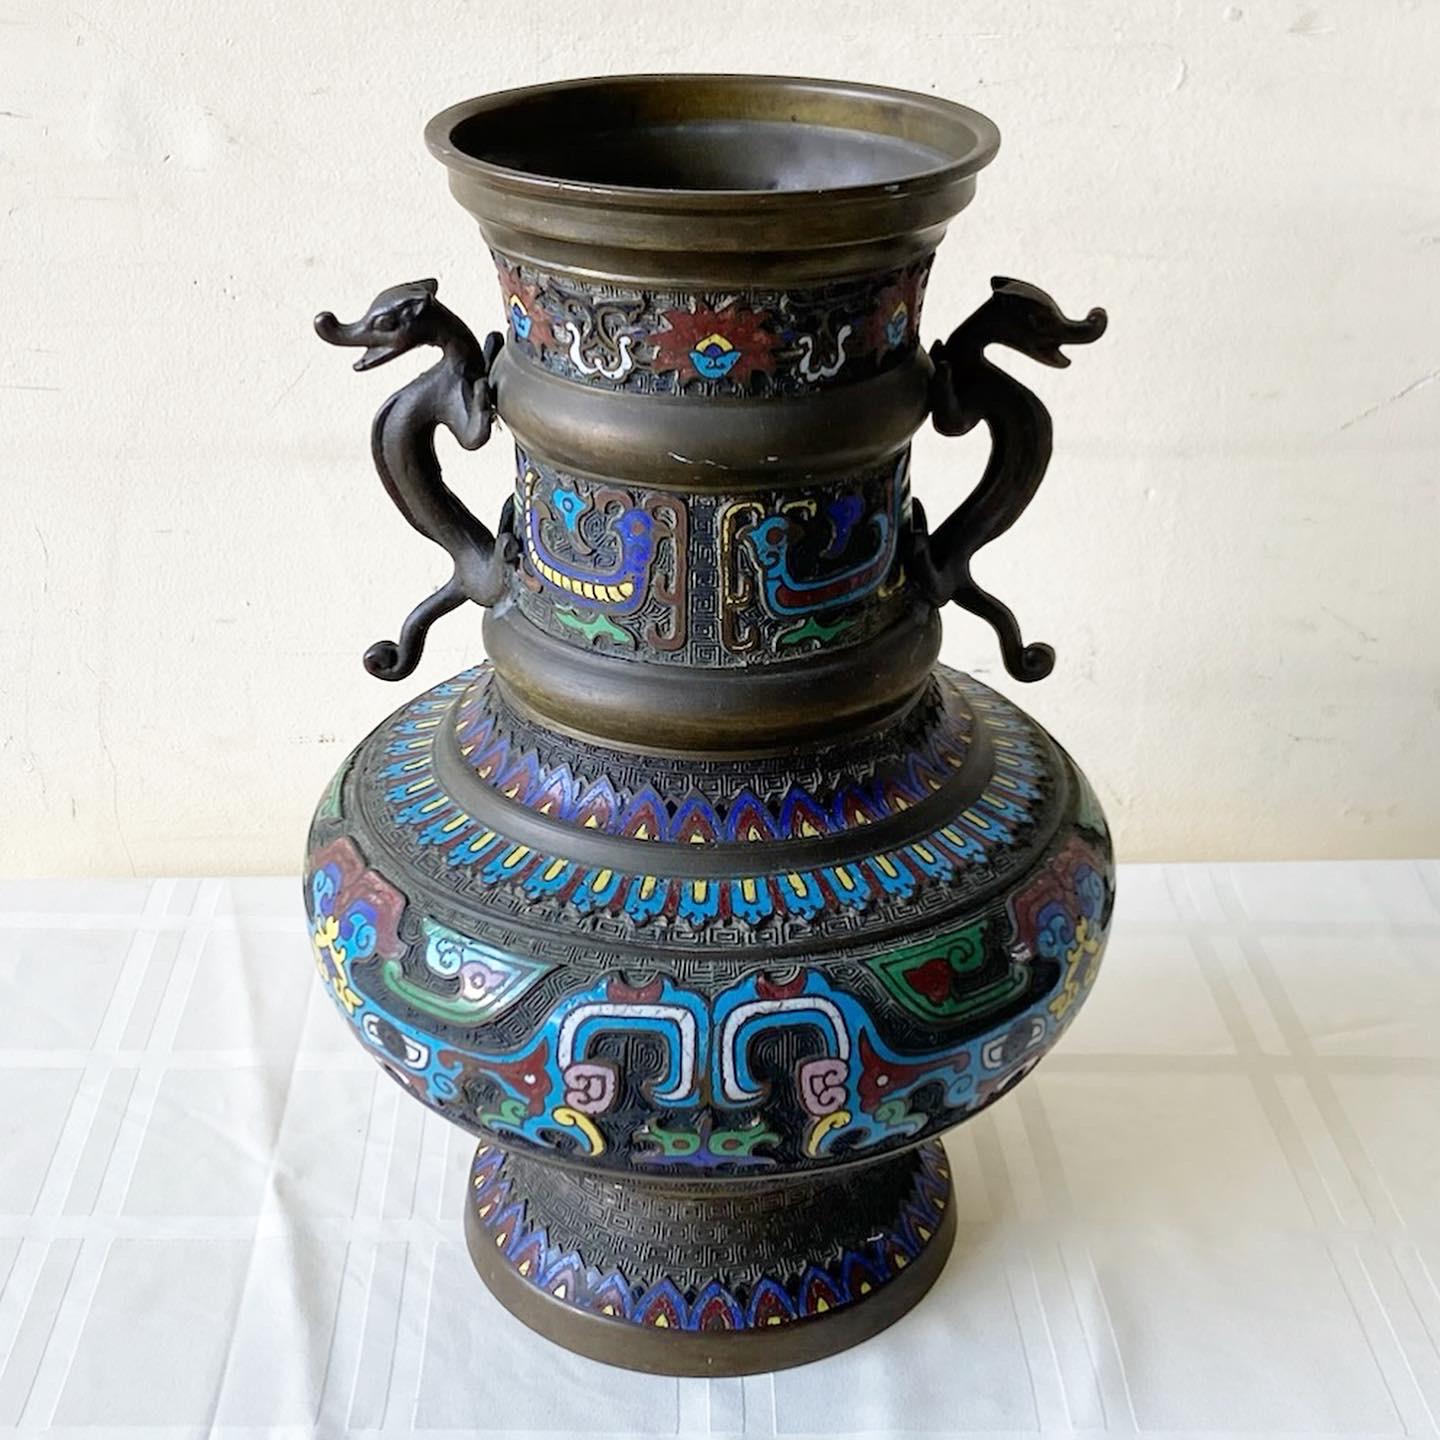 Exceptional early 20th century Japanese brass champleve. Features vibrant enameled decorative designs throughout the vase.
